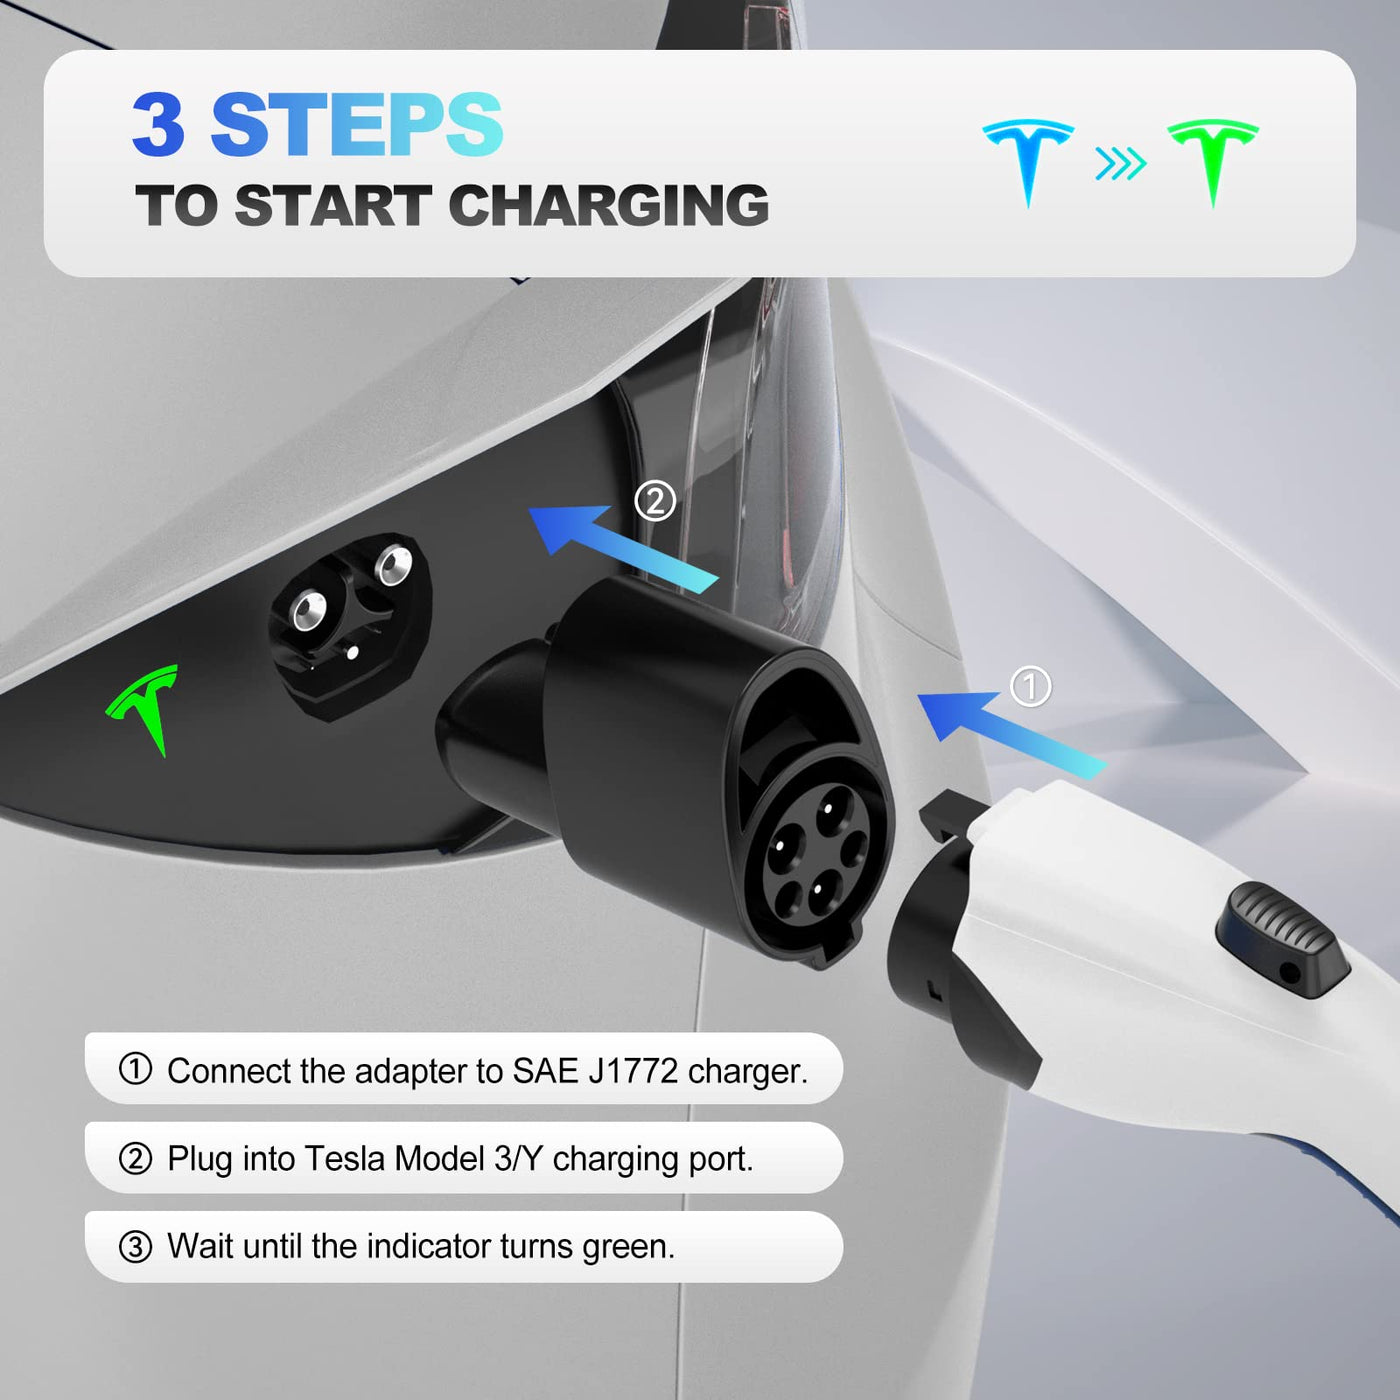 3 steps to start charging, one connect. two plug into tesla model, three wait to light turns green